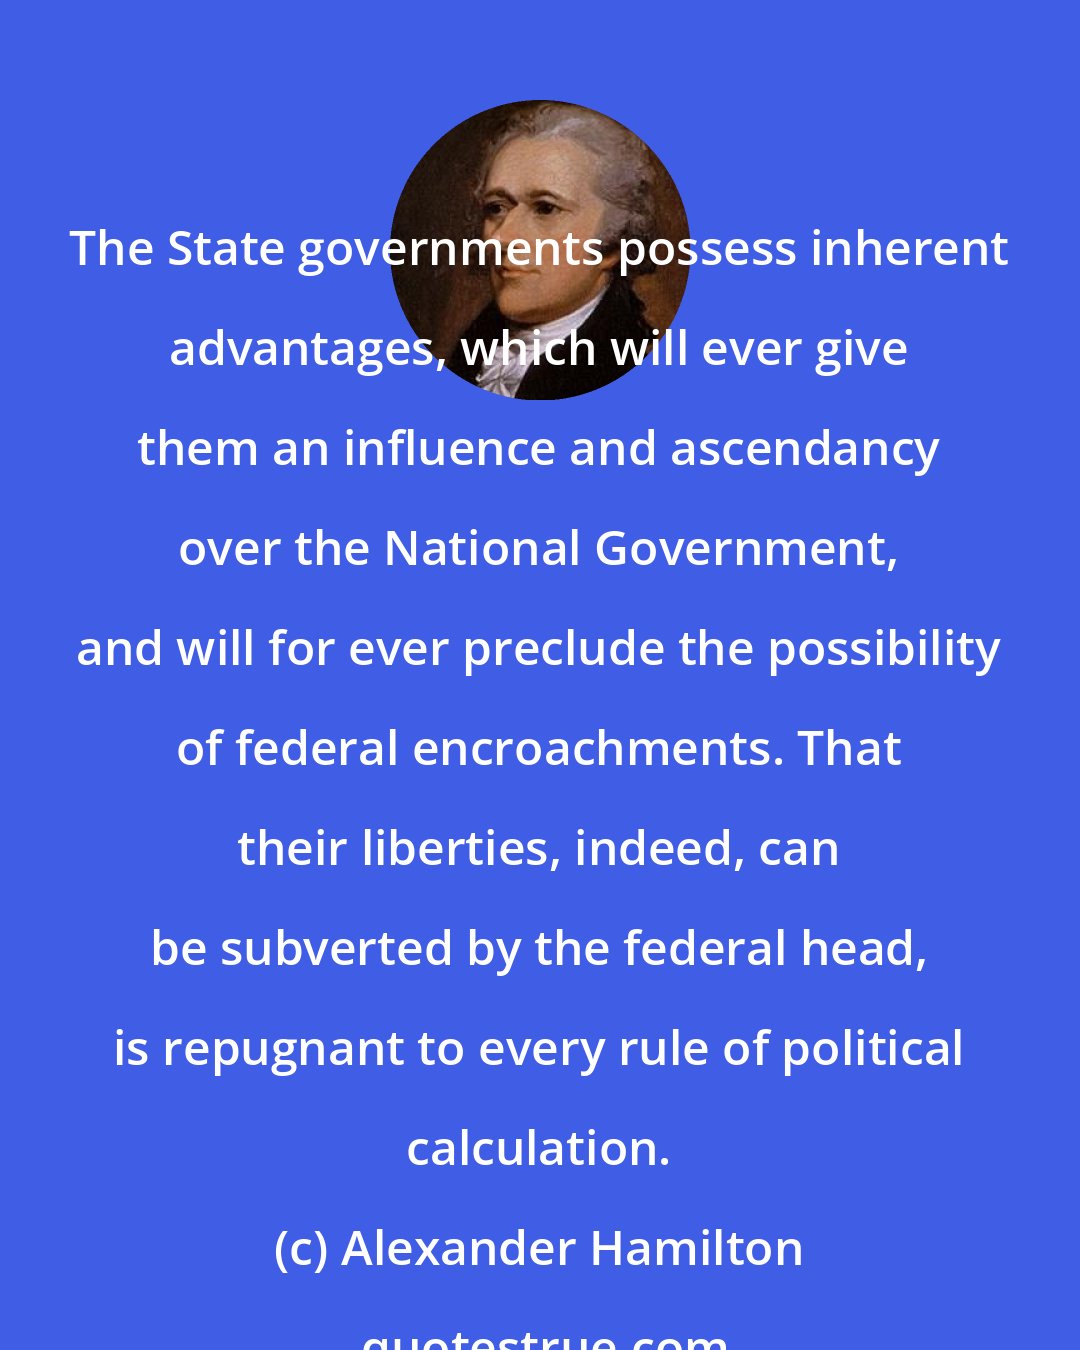 Alexander Hamilton: The State governments possess inherent advantages, which will ever give them an influence and ascendancy over the National Government, and will for ever preclude the possibility of federal encroachments. That their liberties, indeed, can be subverted by the federal head, is repugnant to every rule of political calculation.